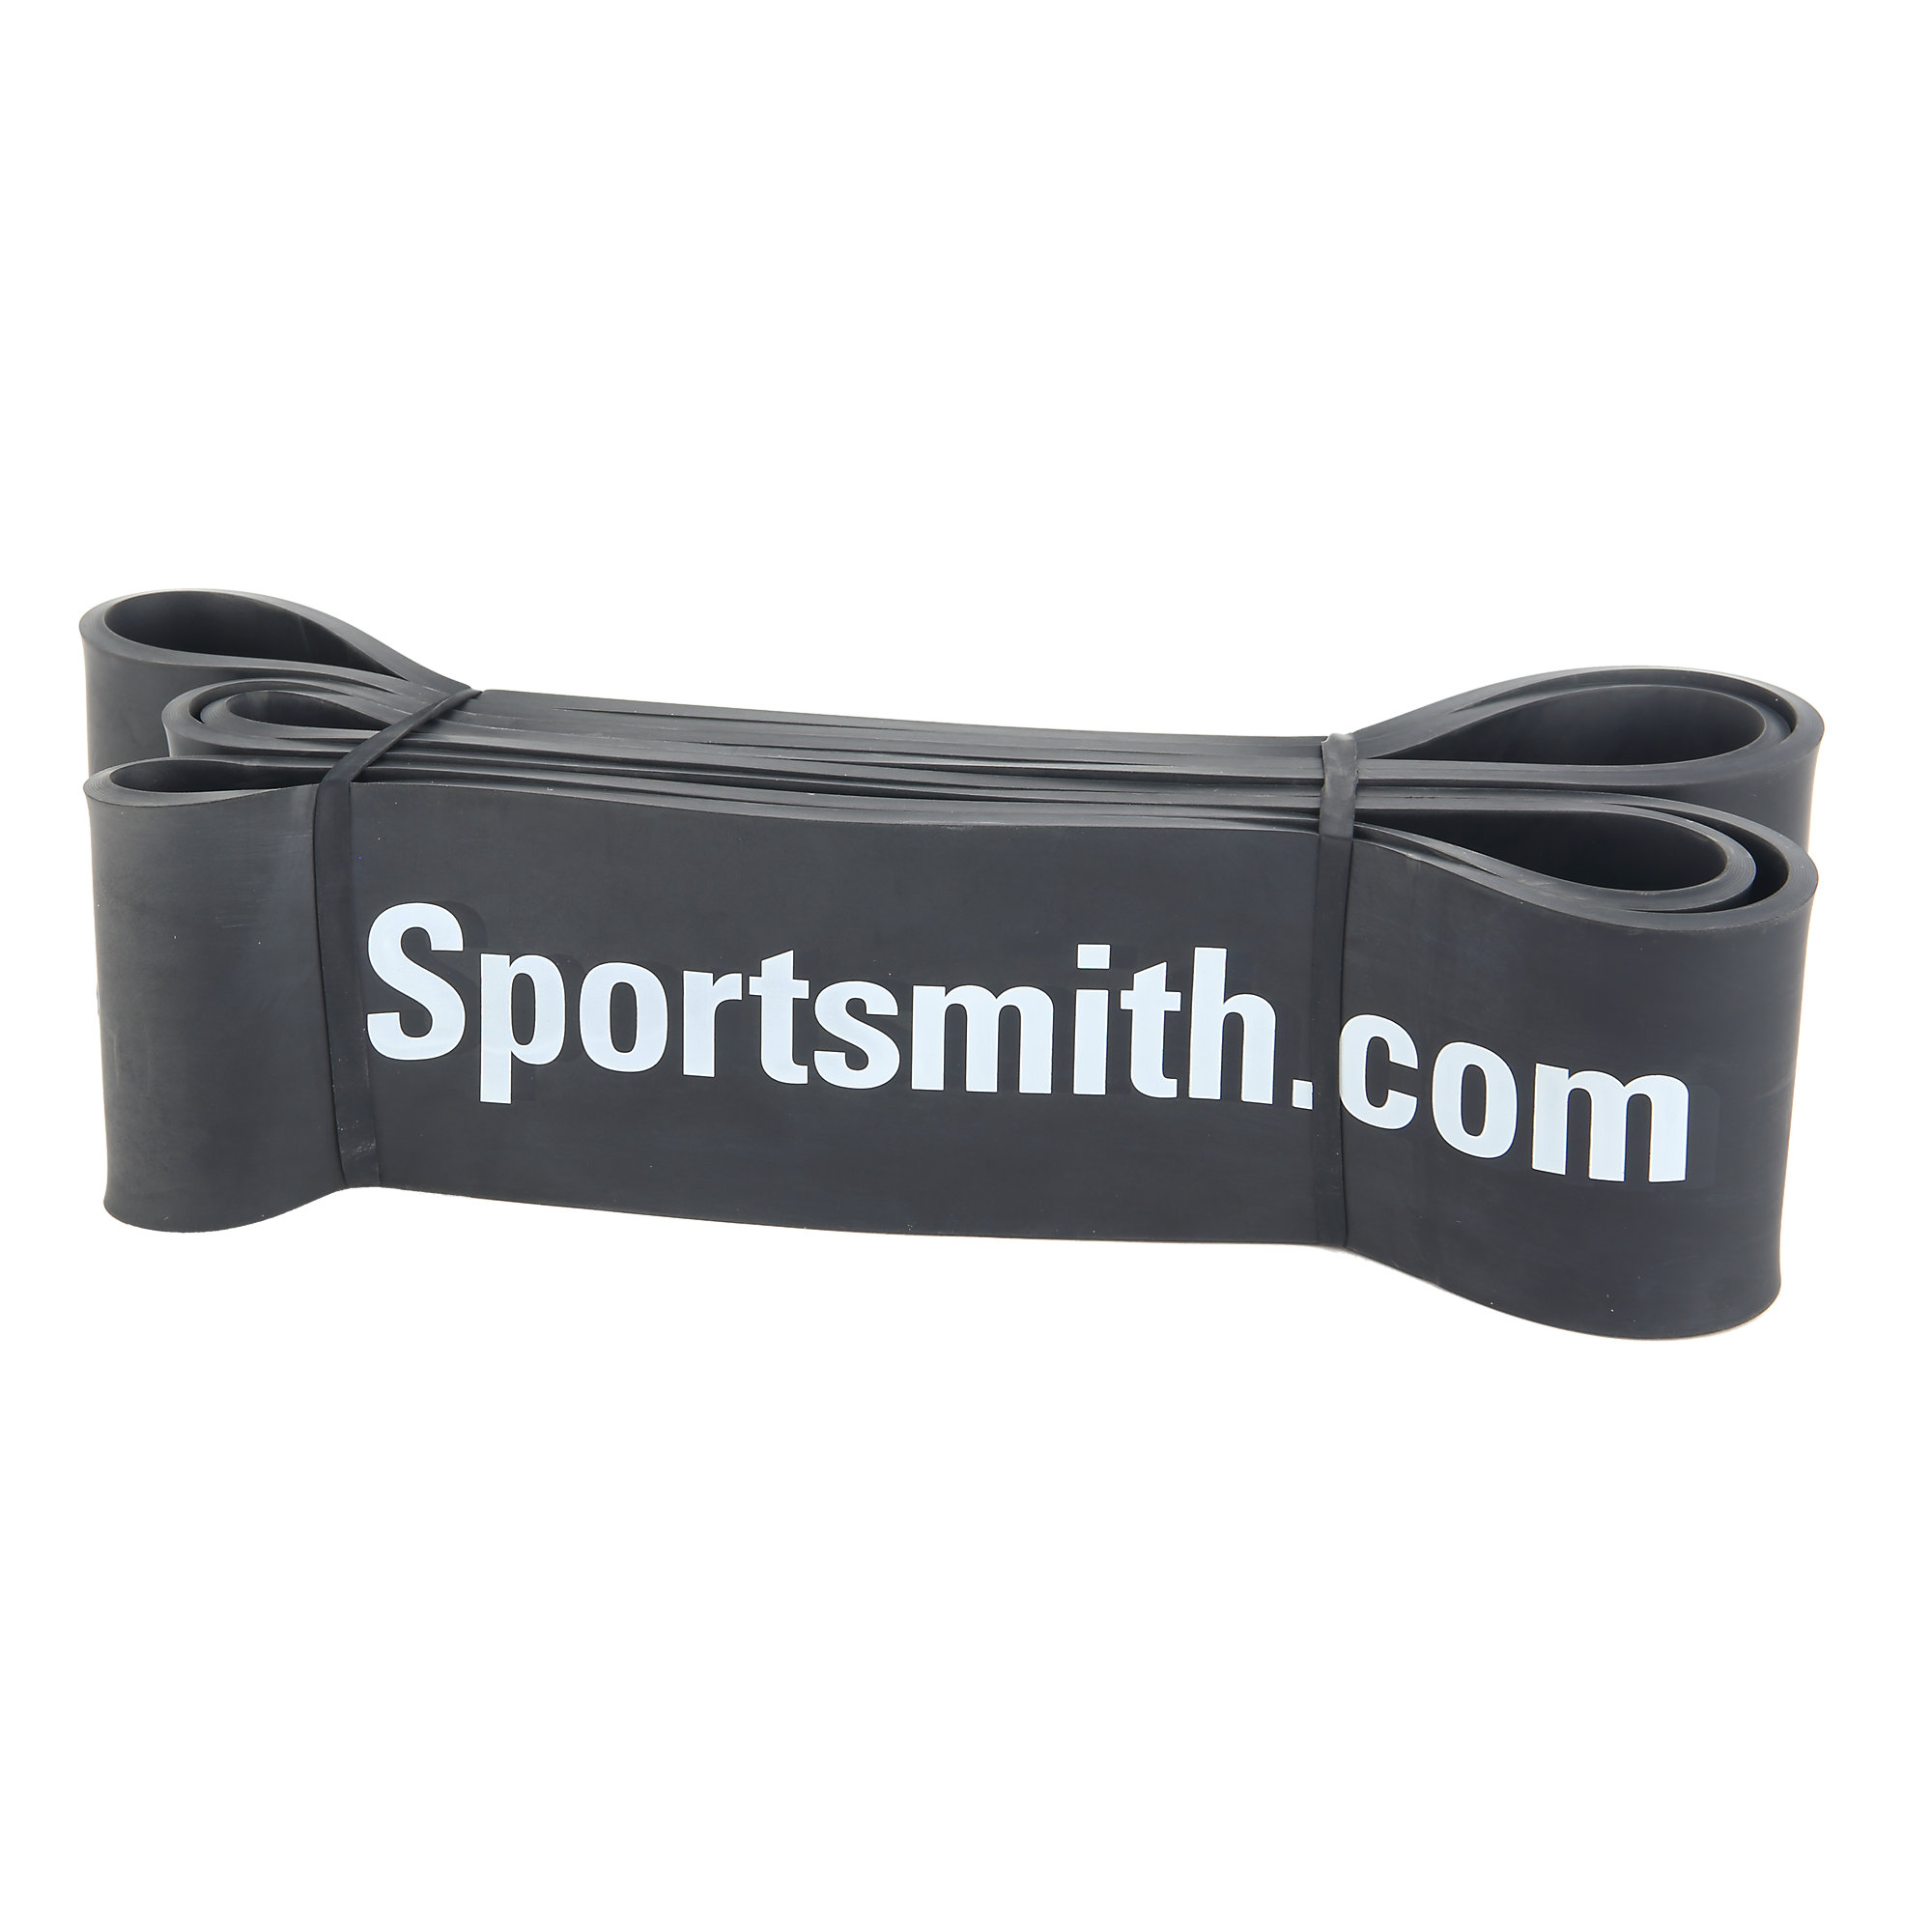 Large Power Resistance Band by Sportsmith, 41", Black